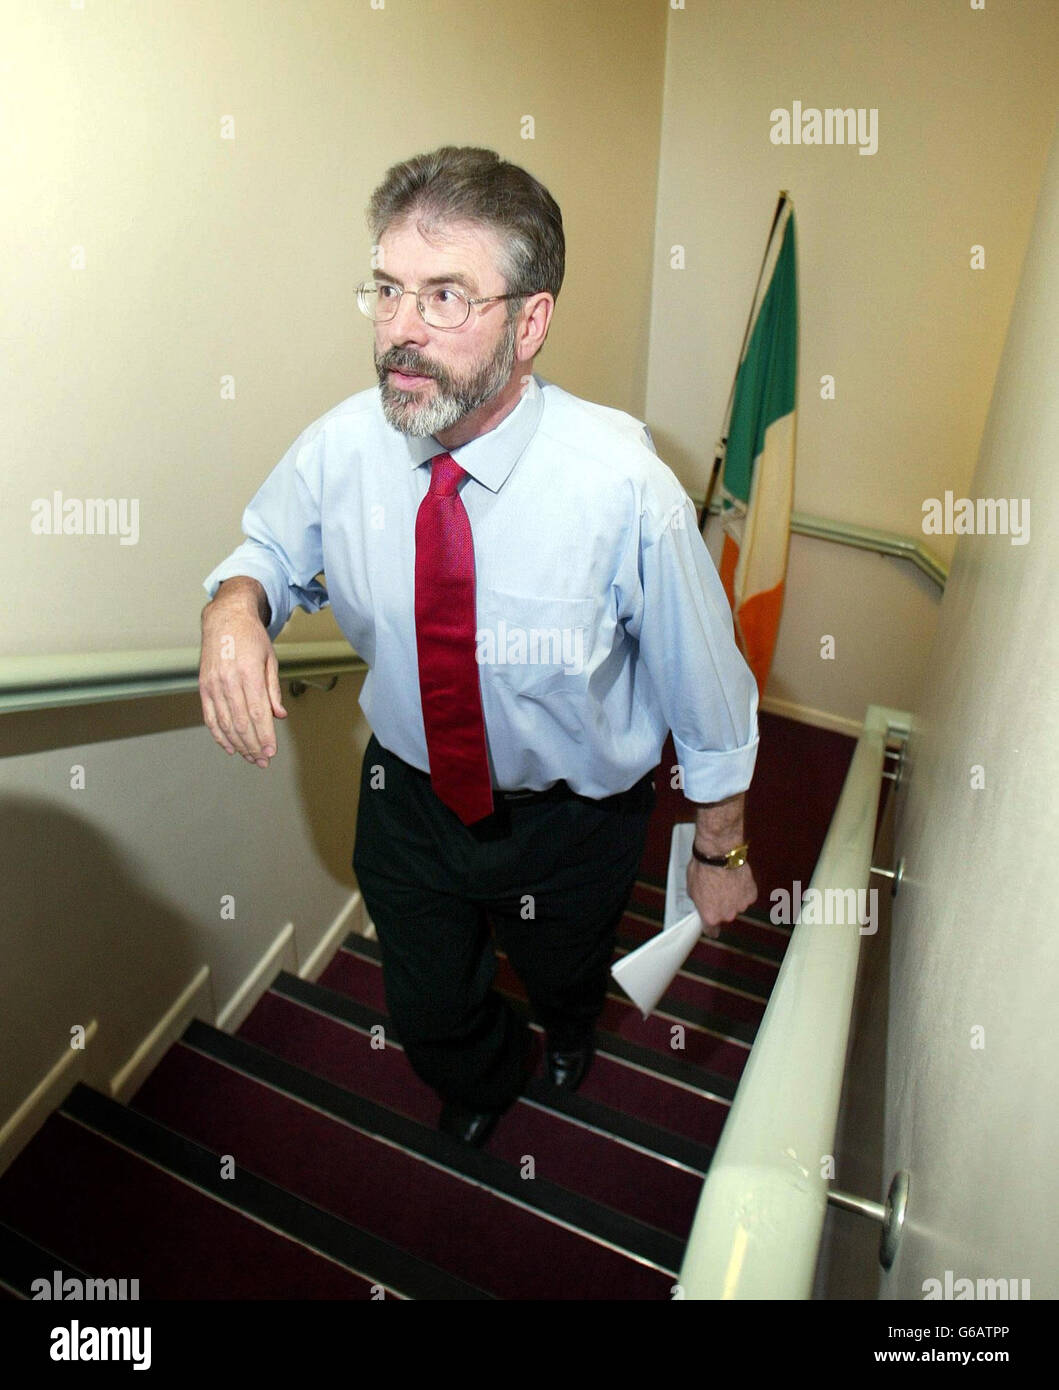 Sinn Fein President Gerry Adams arrives to speak at a press conference in Belfast, during the speak he said that,The IRA will not in any way undermine the peace process or the Good Friday Agreement. *..In a statement which was being billed as the definitive position from republicans on the IRA`s future, Mr Adams said: ``The IRA leadership makes it clear in its statement that it is determined that its activities will be consistent with its resolve to see the complete and final closure of the conflict.` Stock Photo